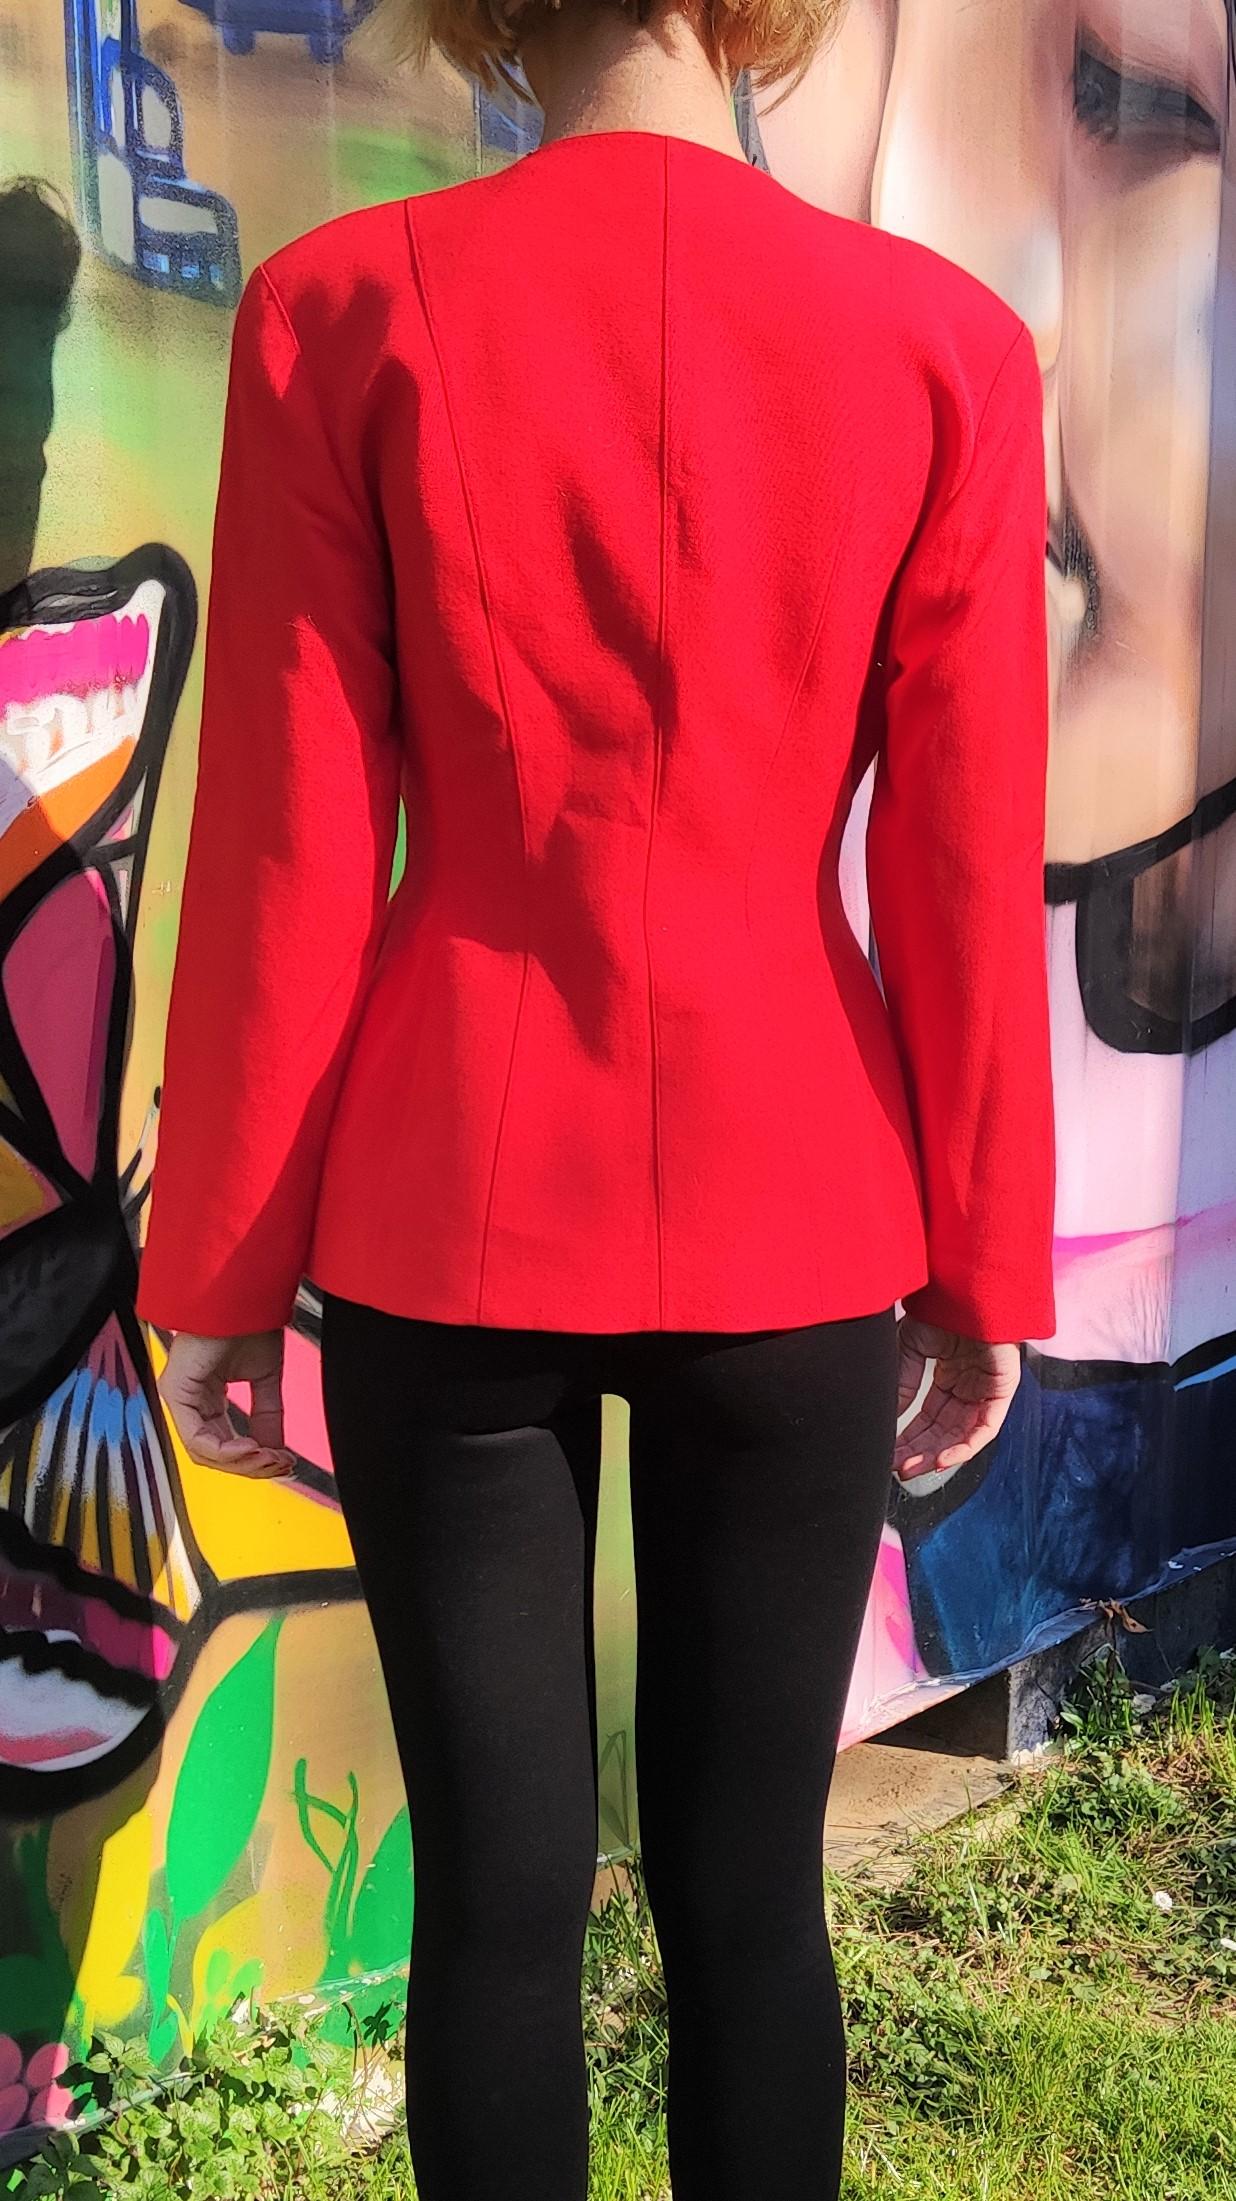 Thierry Mugler Red Wasp Waist Bee Vintage 90s Runway Couture Suit Blazer Jacket 1